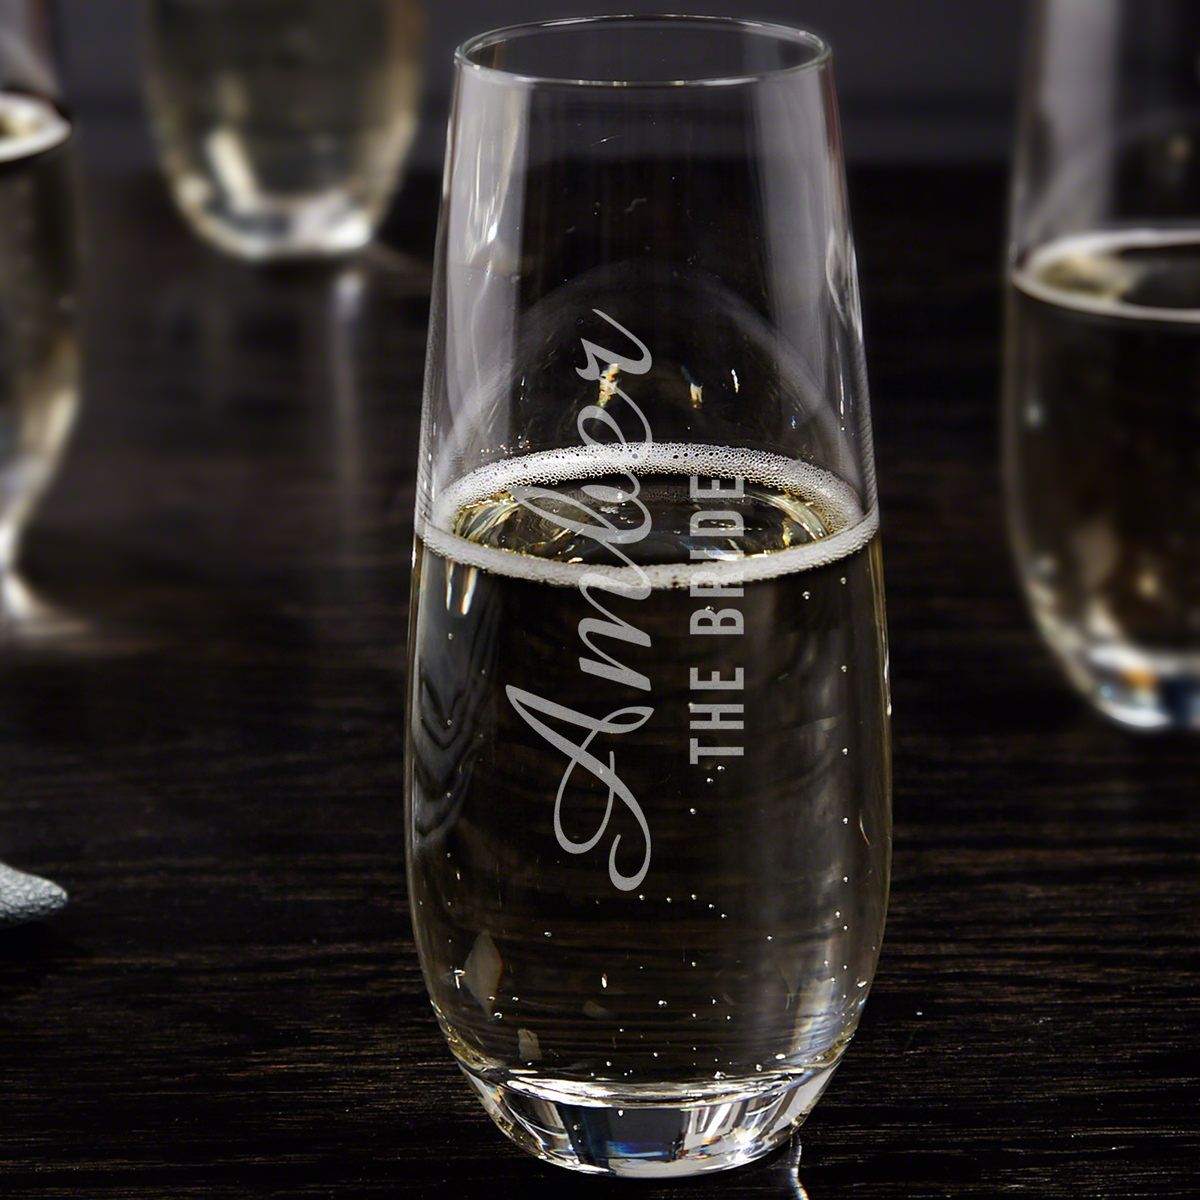 https://images.homewetbar.com/media/catalog/product/l/a/lassarre-personalized-stemless-champagne-flute-p_7245.jpg?store=default&image-type=image